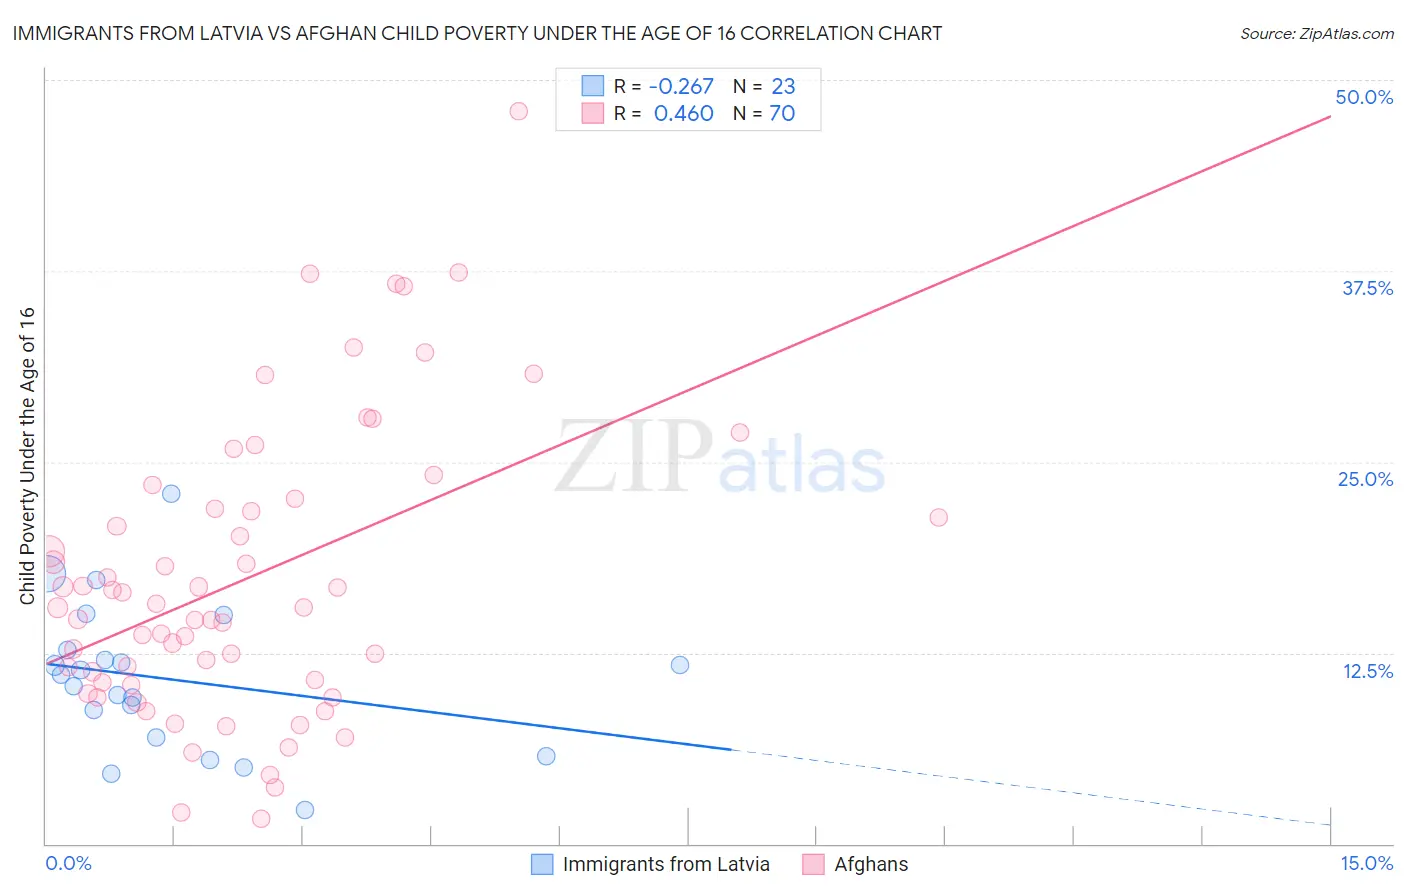 Immigrants from Latvia vs Afghan Child Poverty Under the Age of 16